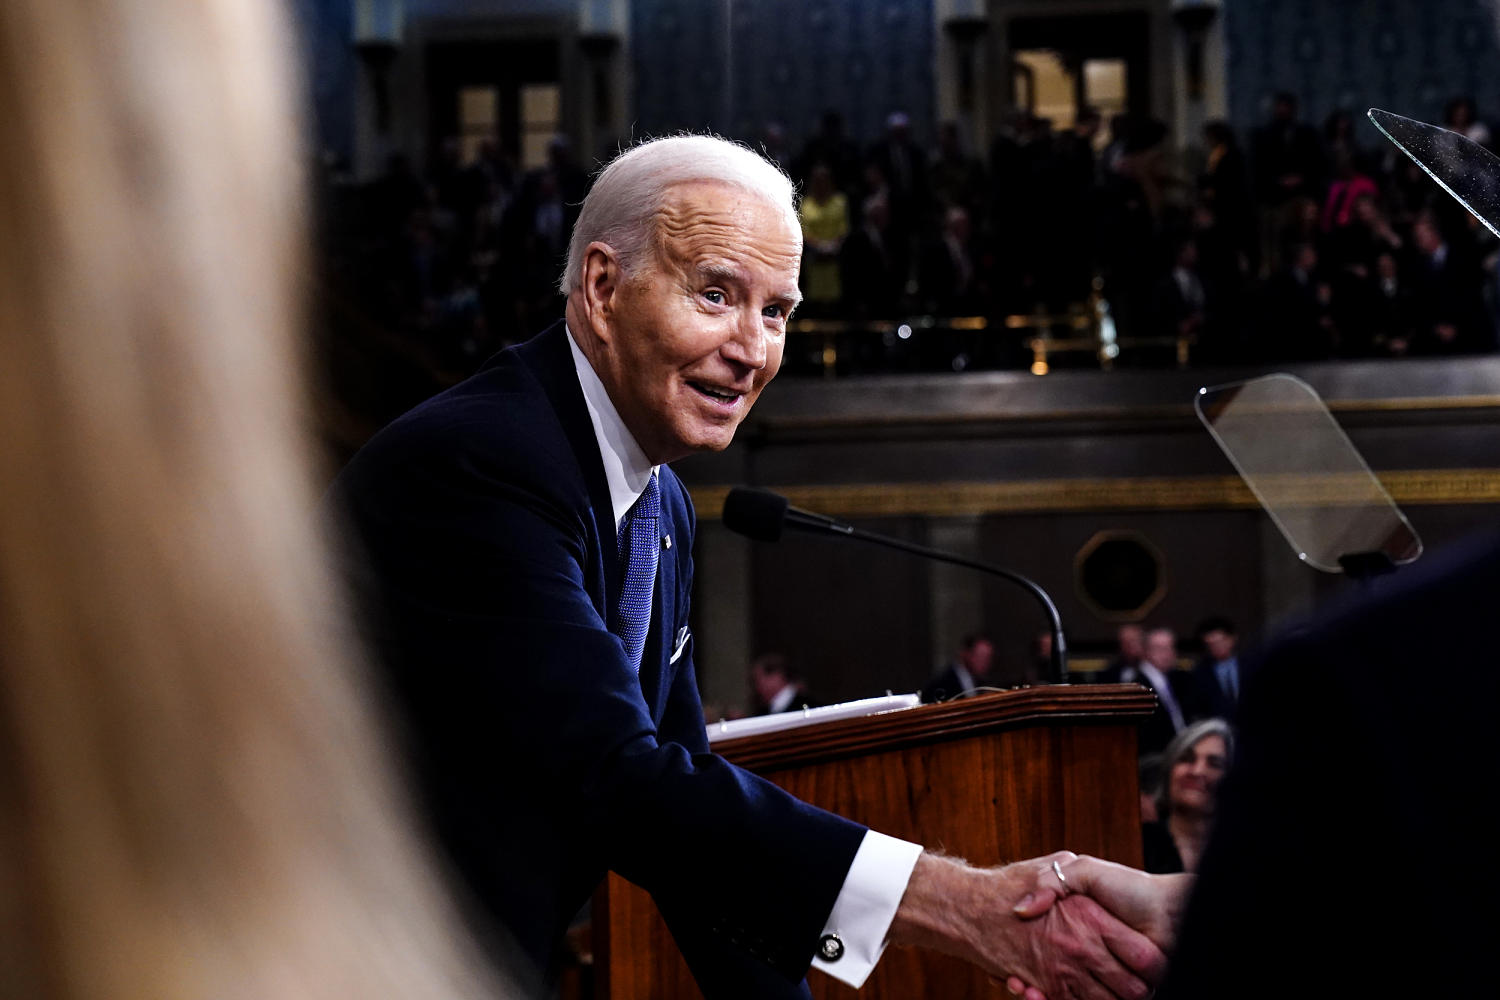 Biden’s defense of the economy in his State of the Union deserves another listen